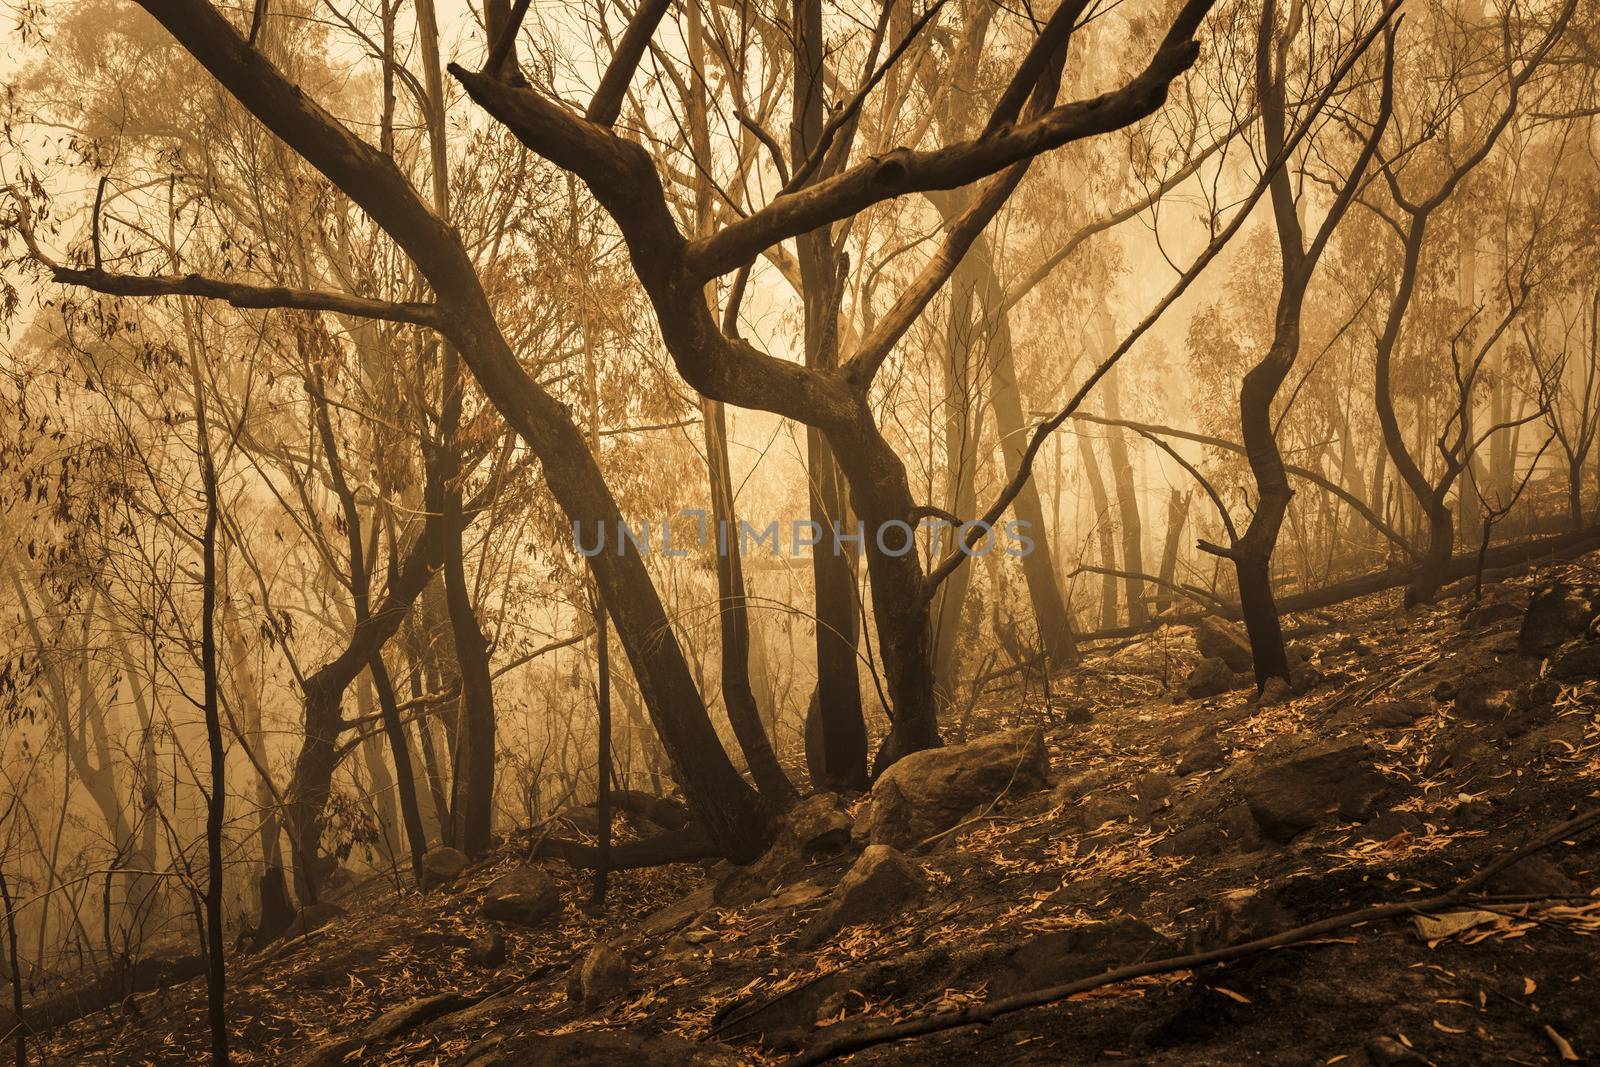 Gum Trees burnt by bushfire in The Blue Mountains in Australia by WittkePhotos